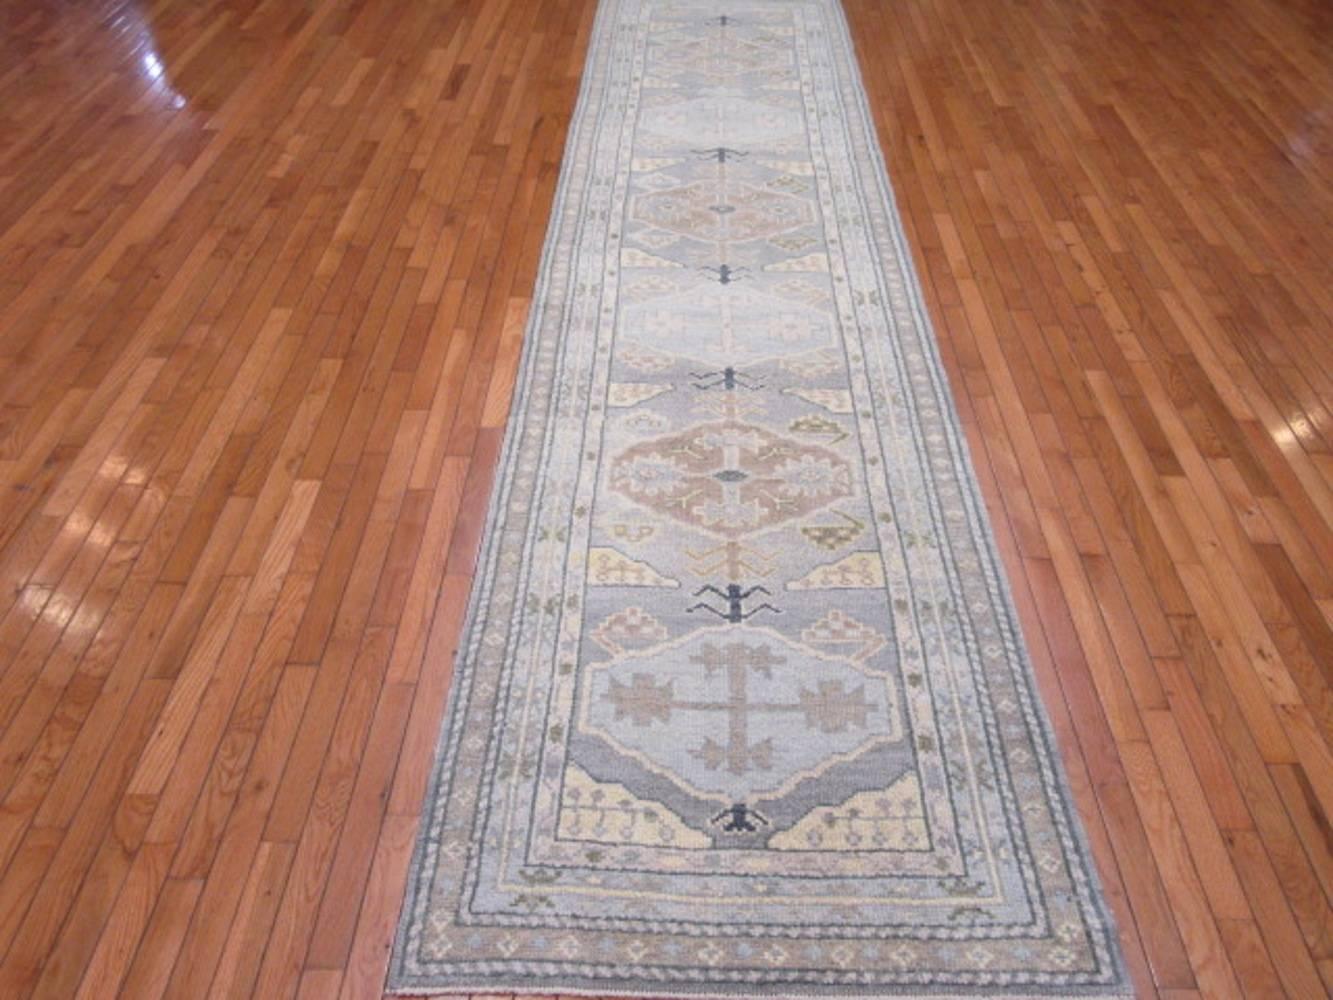 This is a new hand-knotted Turkish Oushak runner rug. It is made with 100% wool colored with natural dyes in contemporary popular tones. It's durable construction make it a great fit for any hall or space in the house. It measures 3' 3'' x 13' 1''.